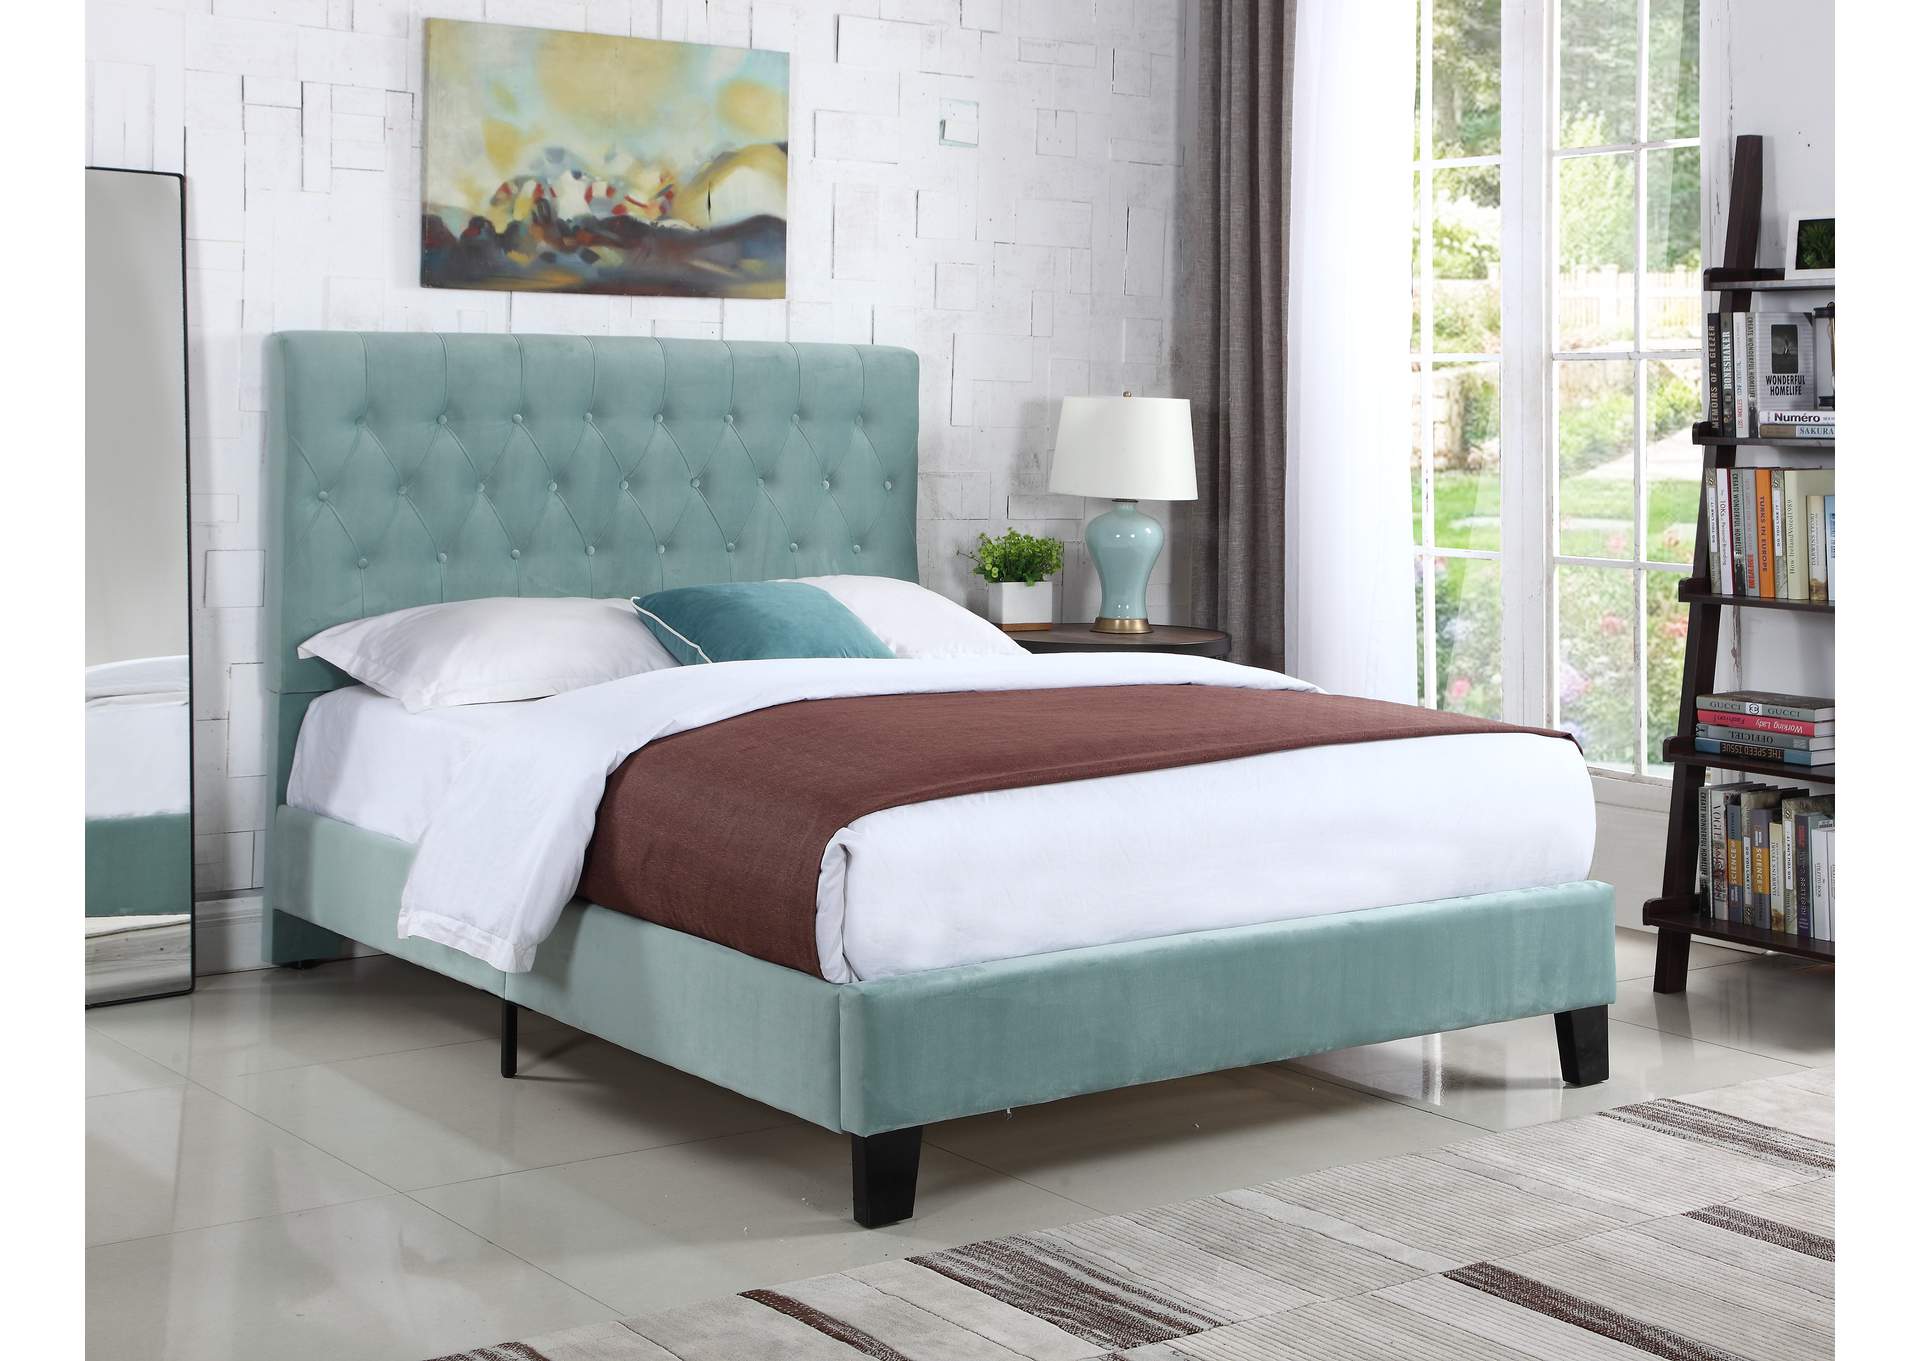 Amelia Queen Upholstered Bed,Emerald Home Furnishings